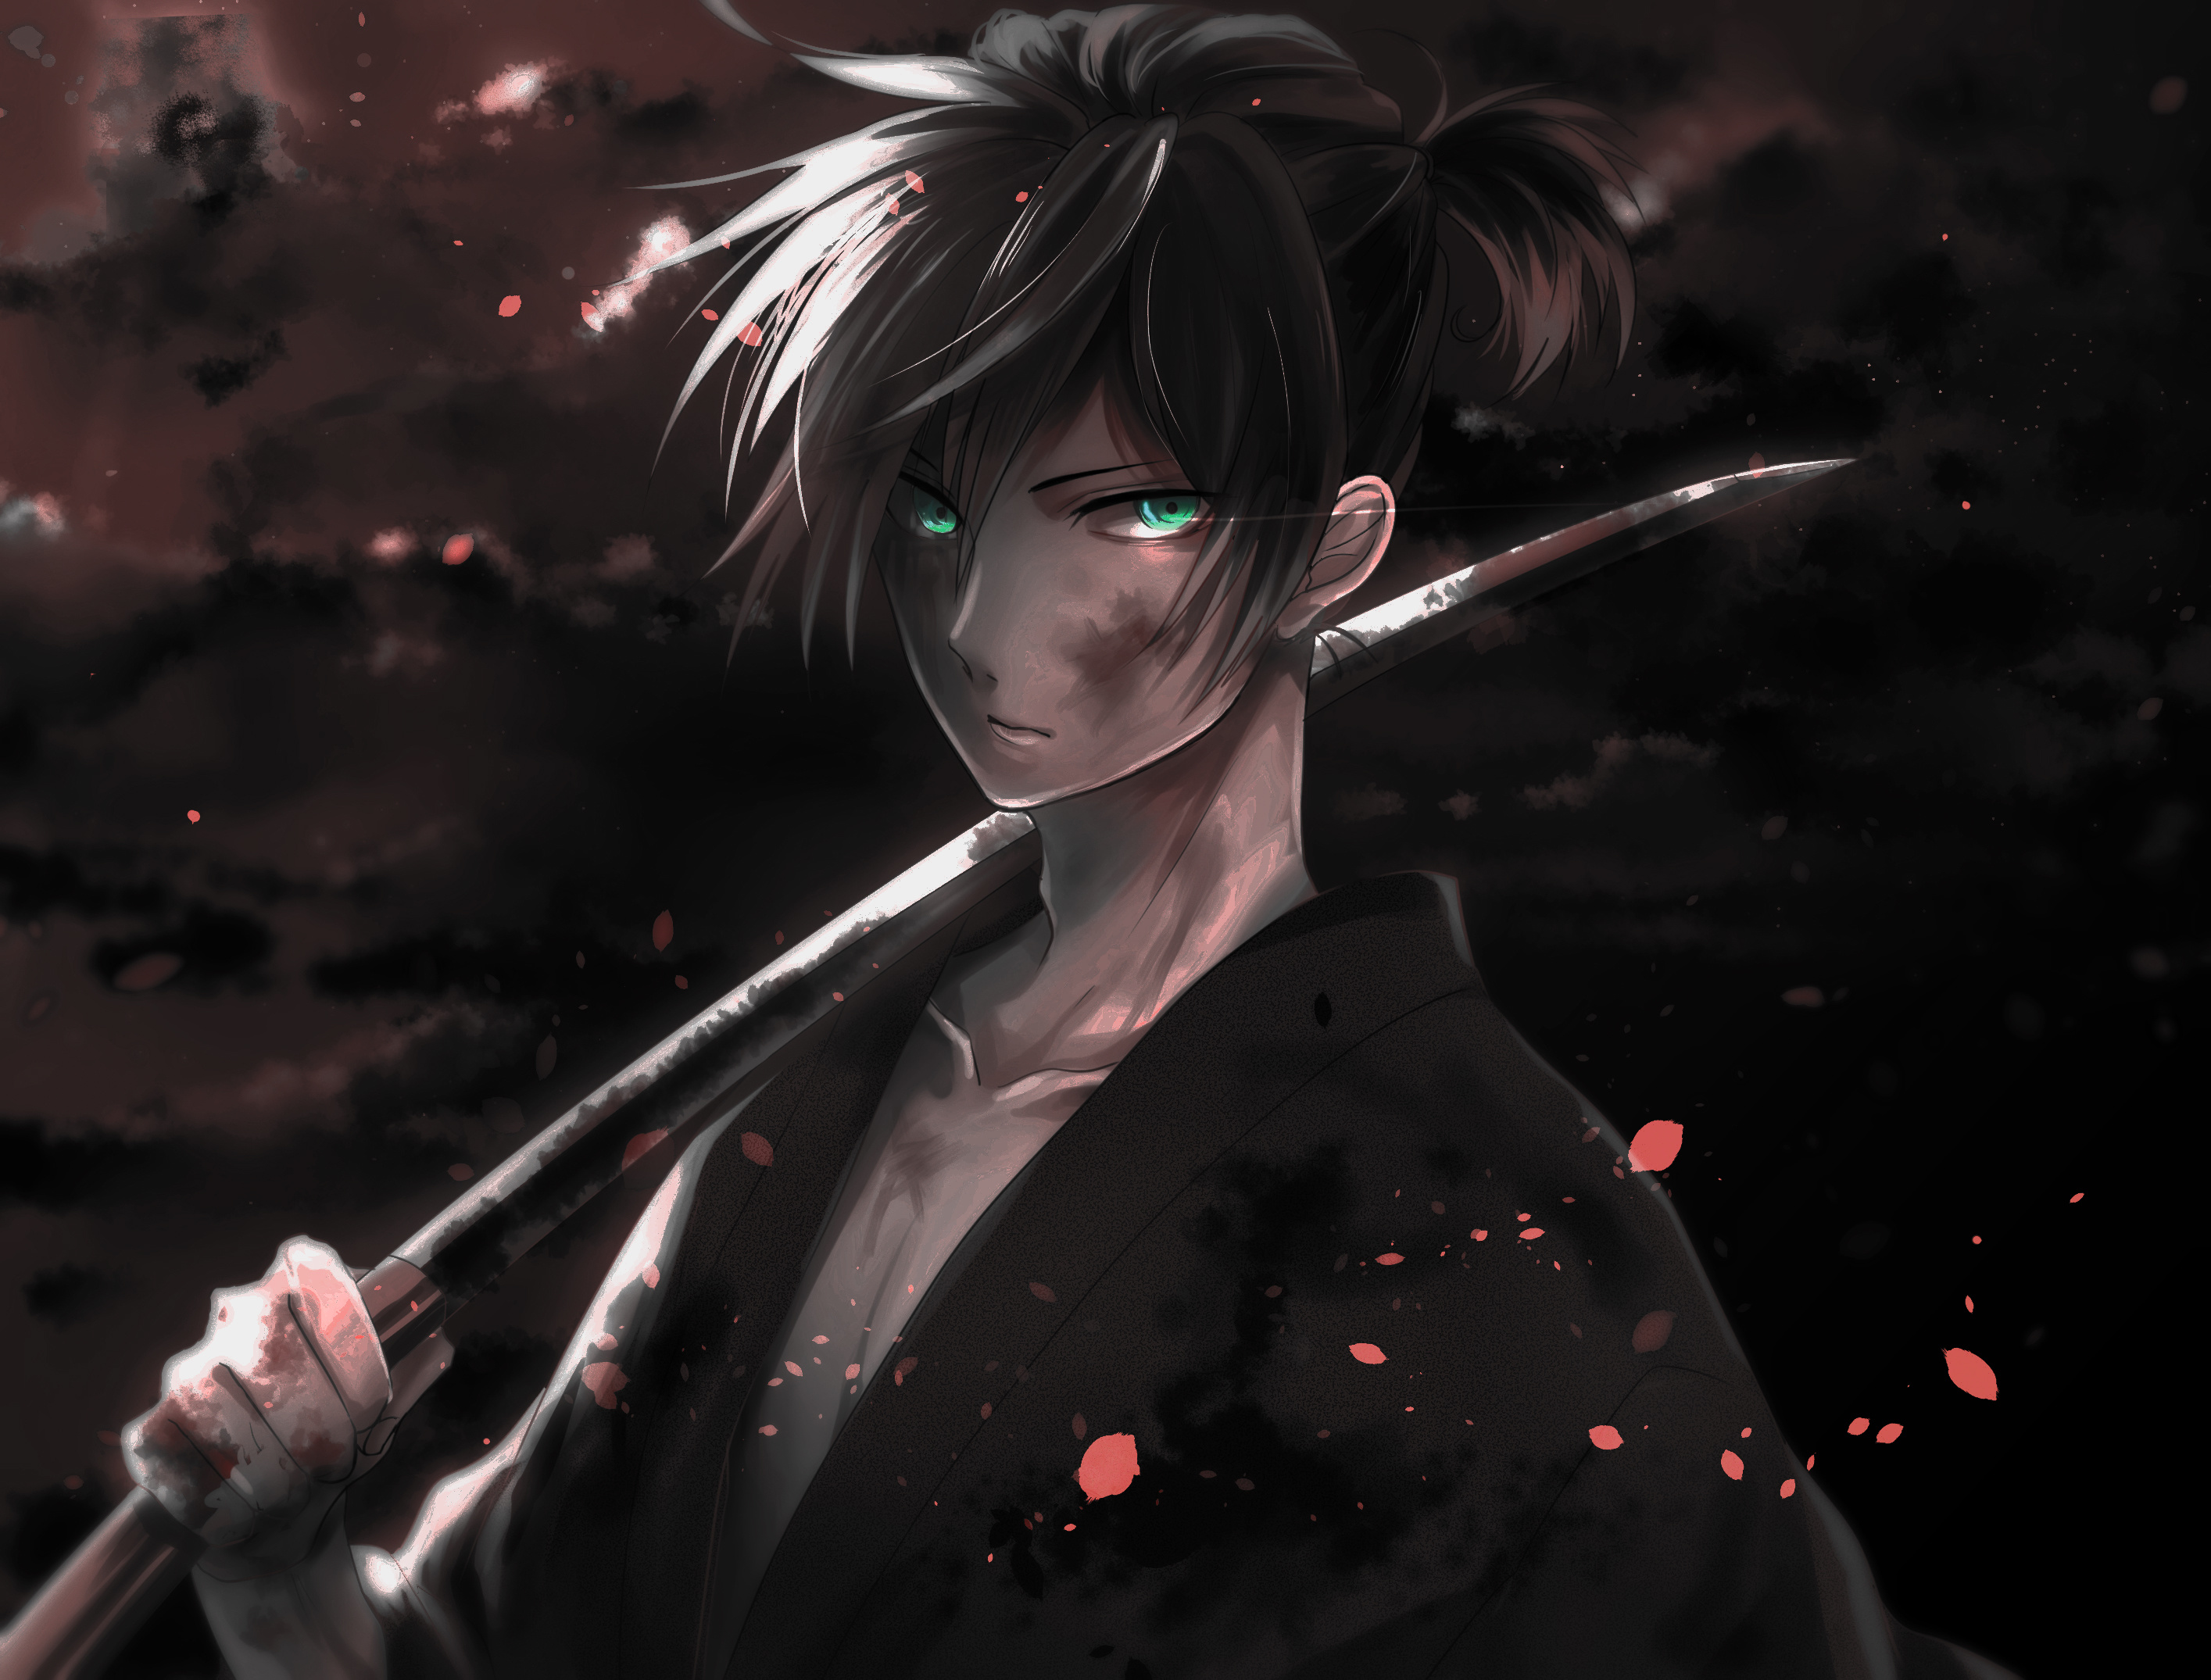 2. Yato from Noragami - wide 10